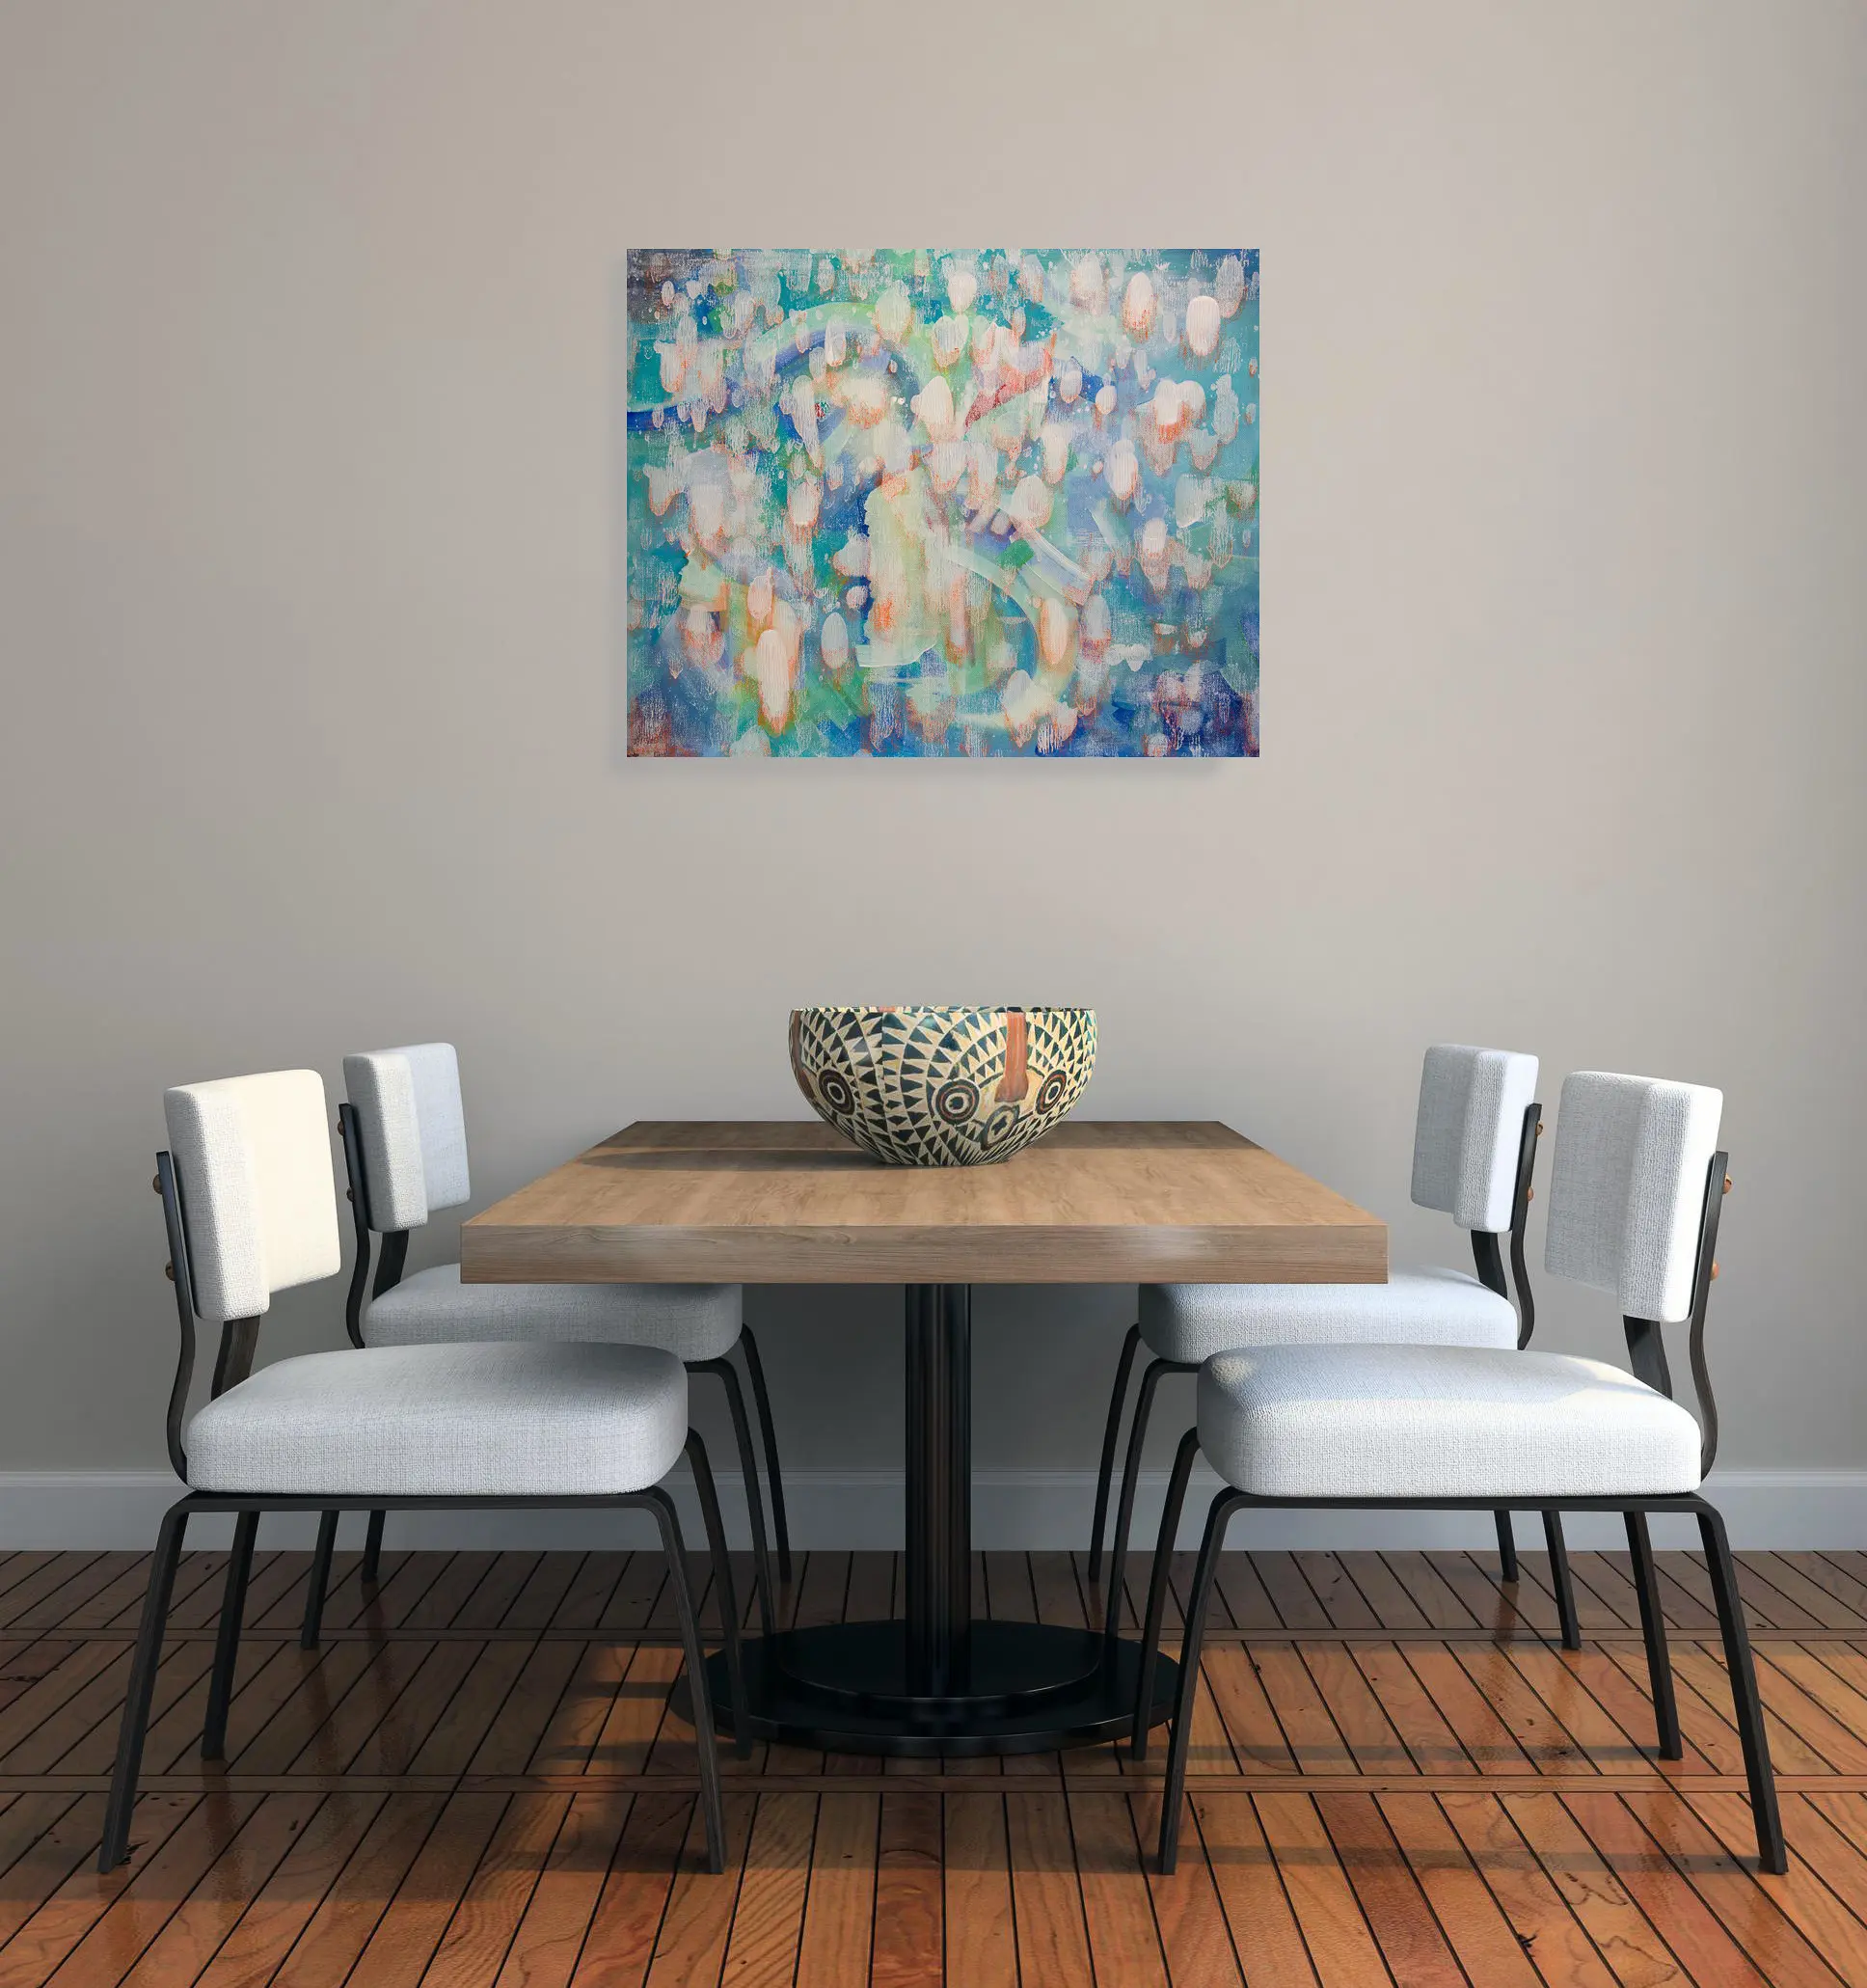 original abstract painting in dining area